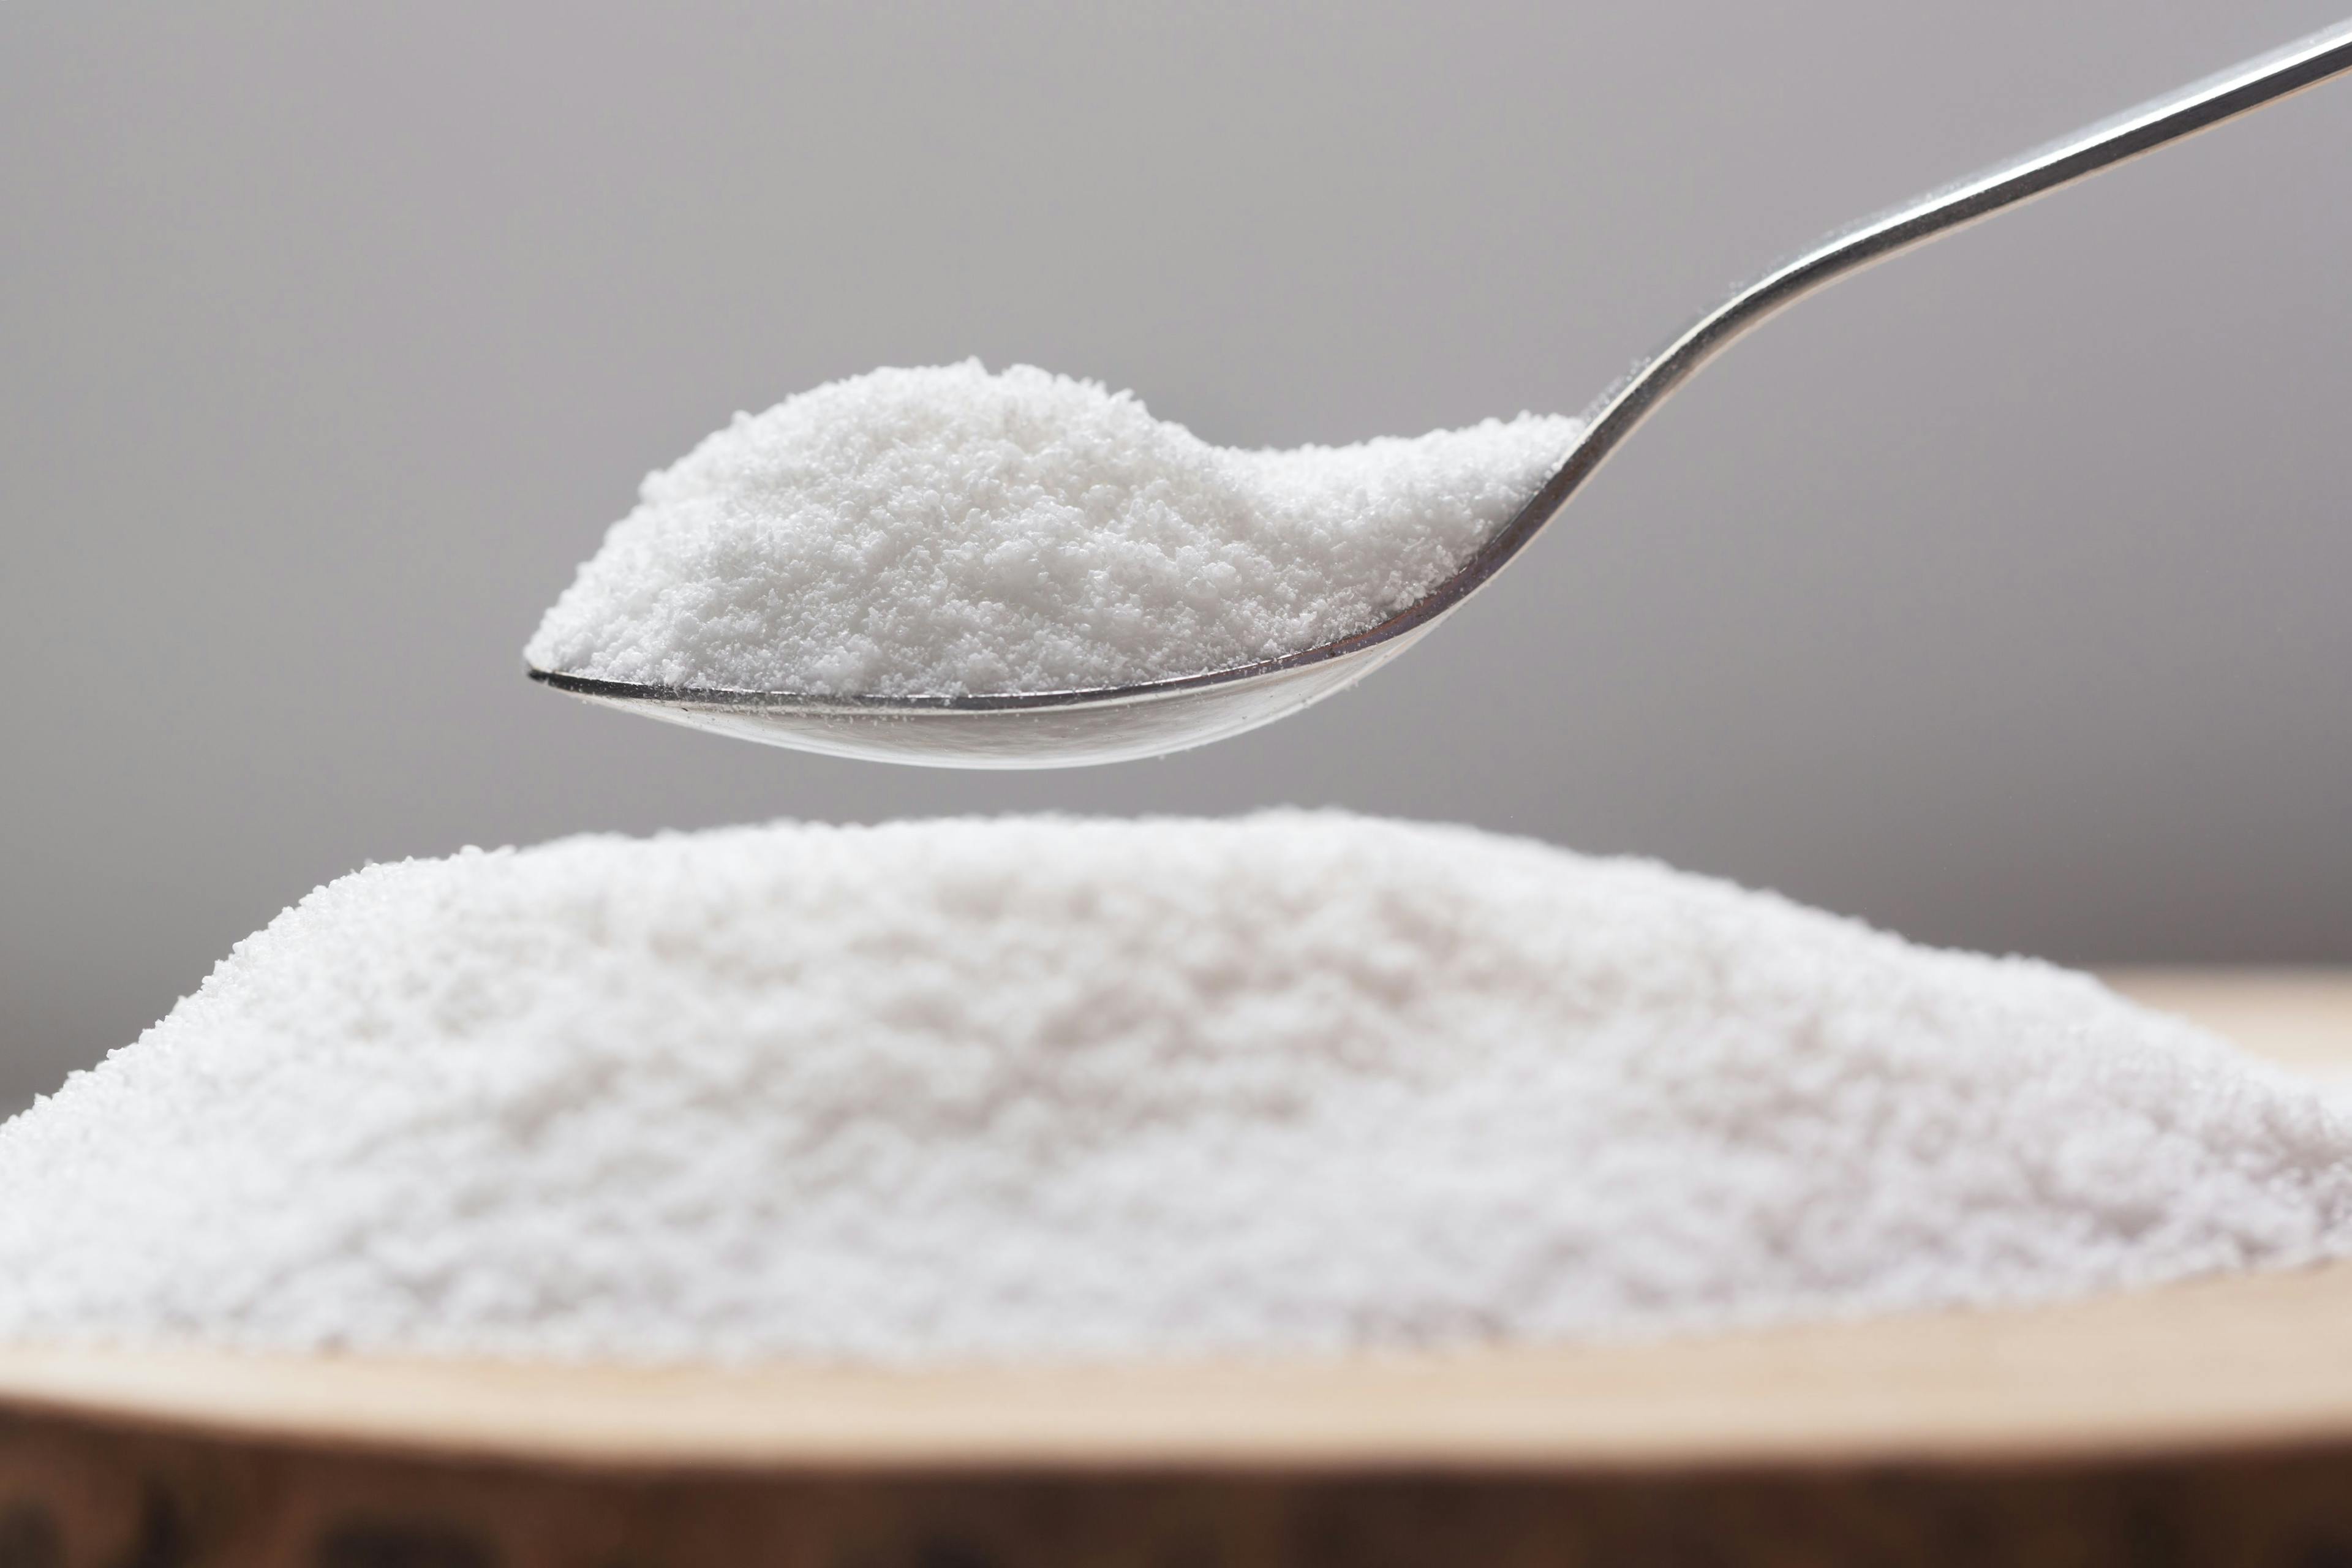 Spoon with natural sweetener stevia on a heap | Image Credit: © zakiroff - stock.adobe.com